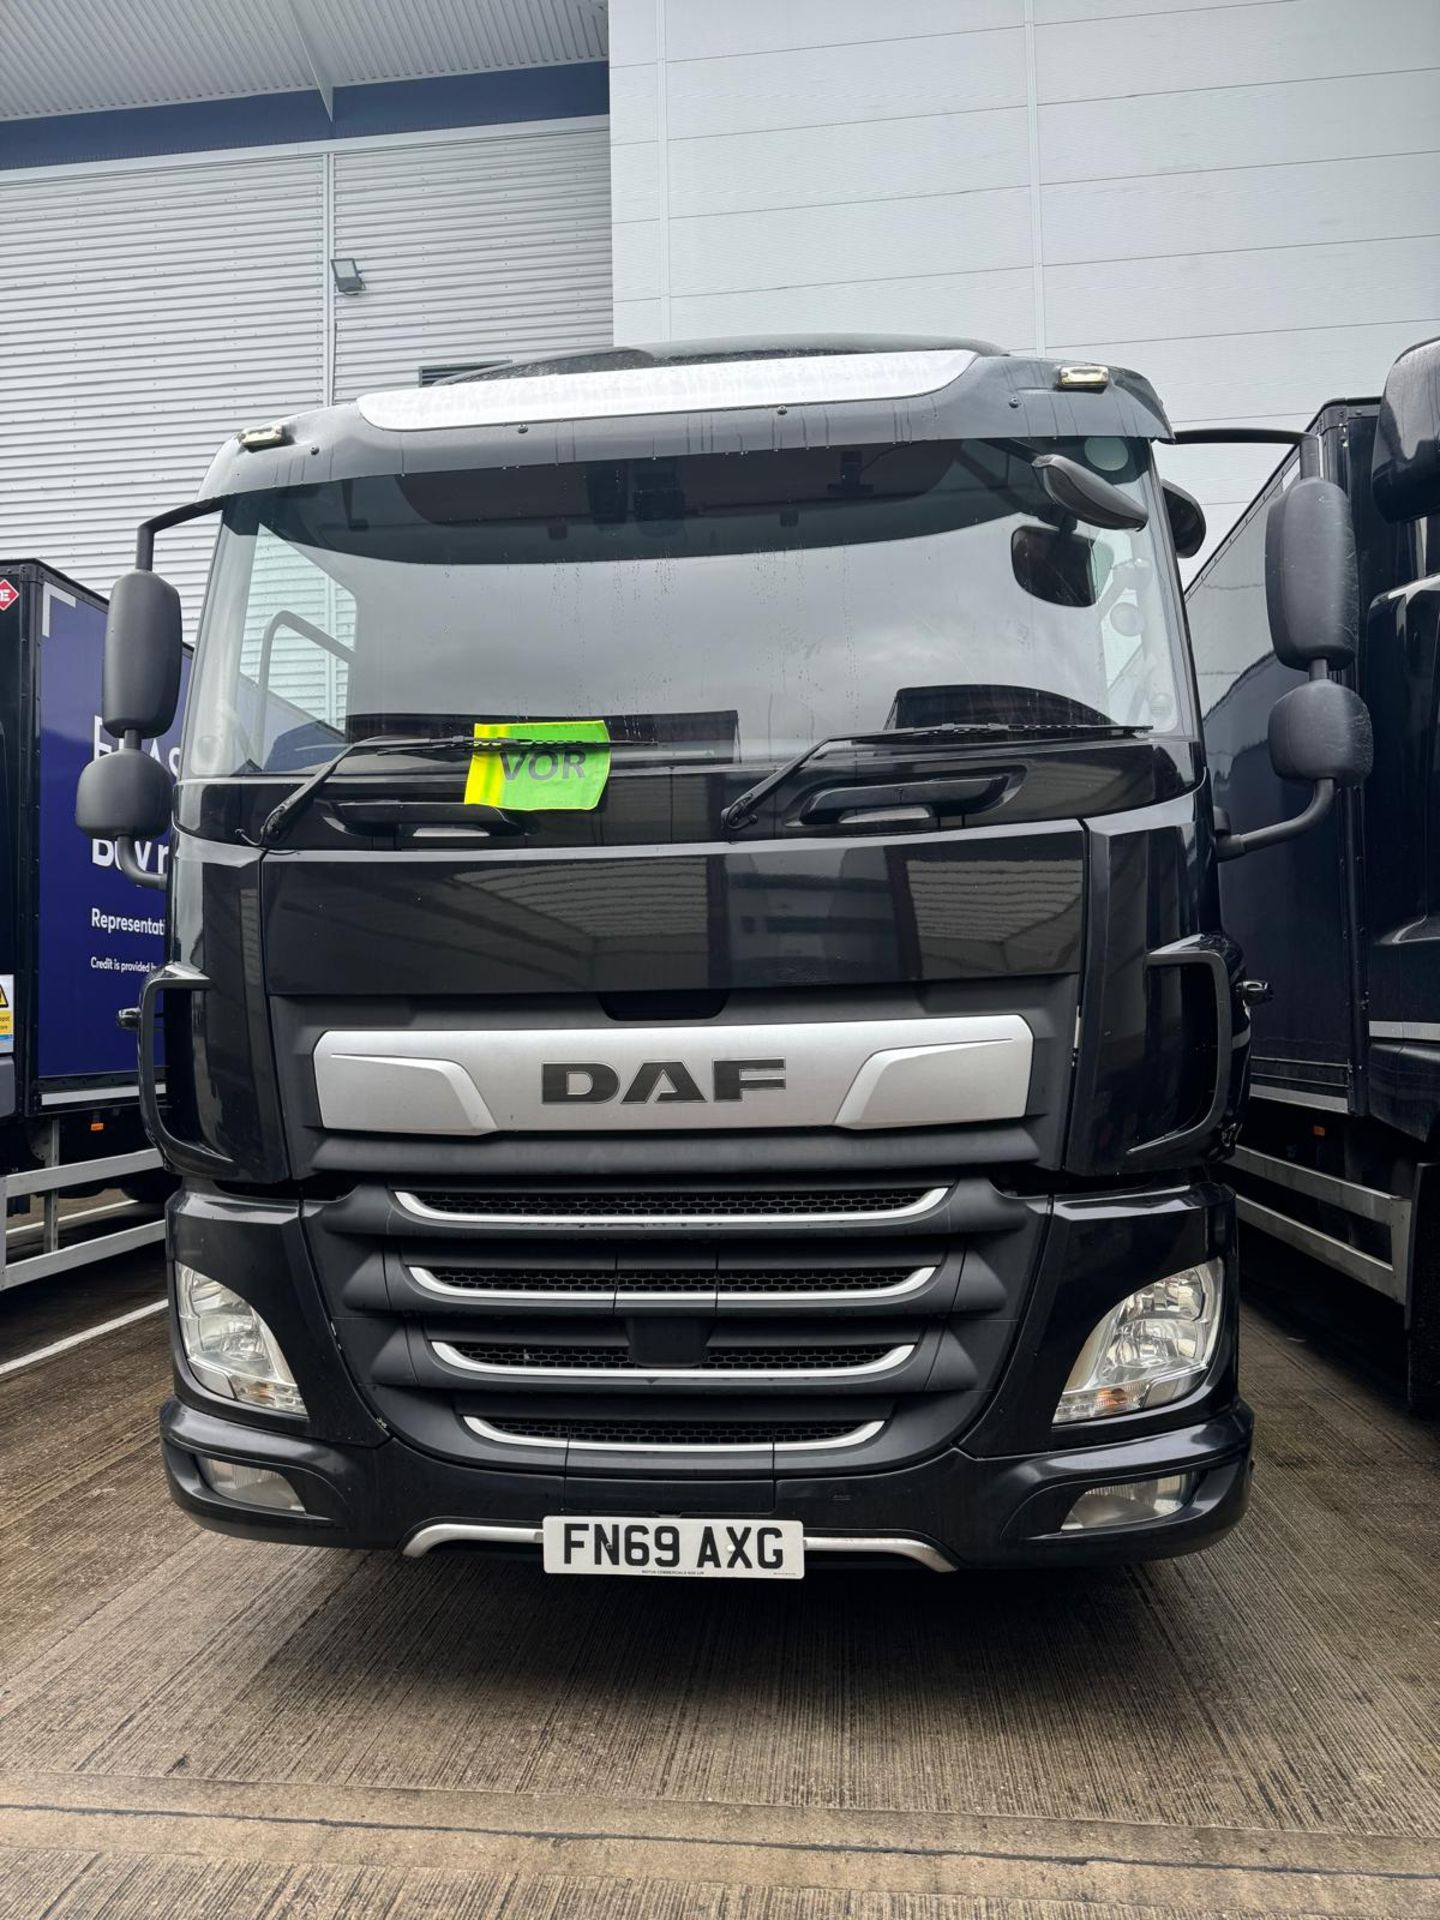 2019, DAF CF 260 - FN69 AXG (18 Ton Rigid Truck with Tail Lift)